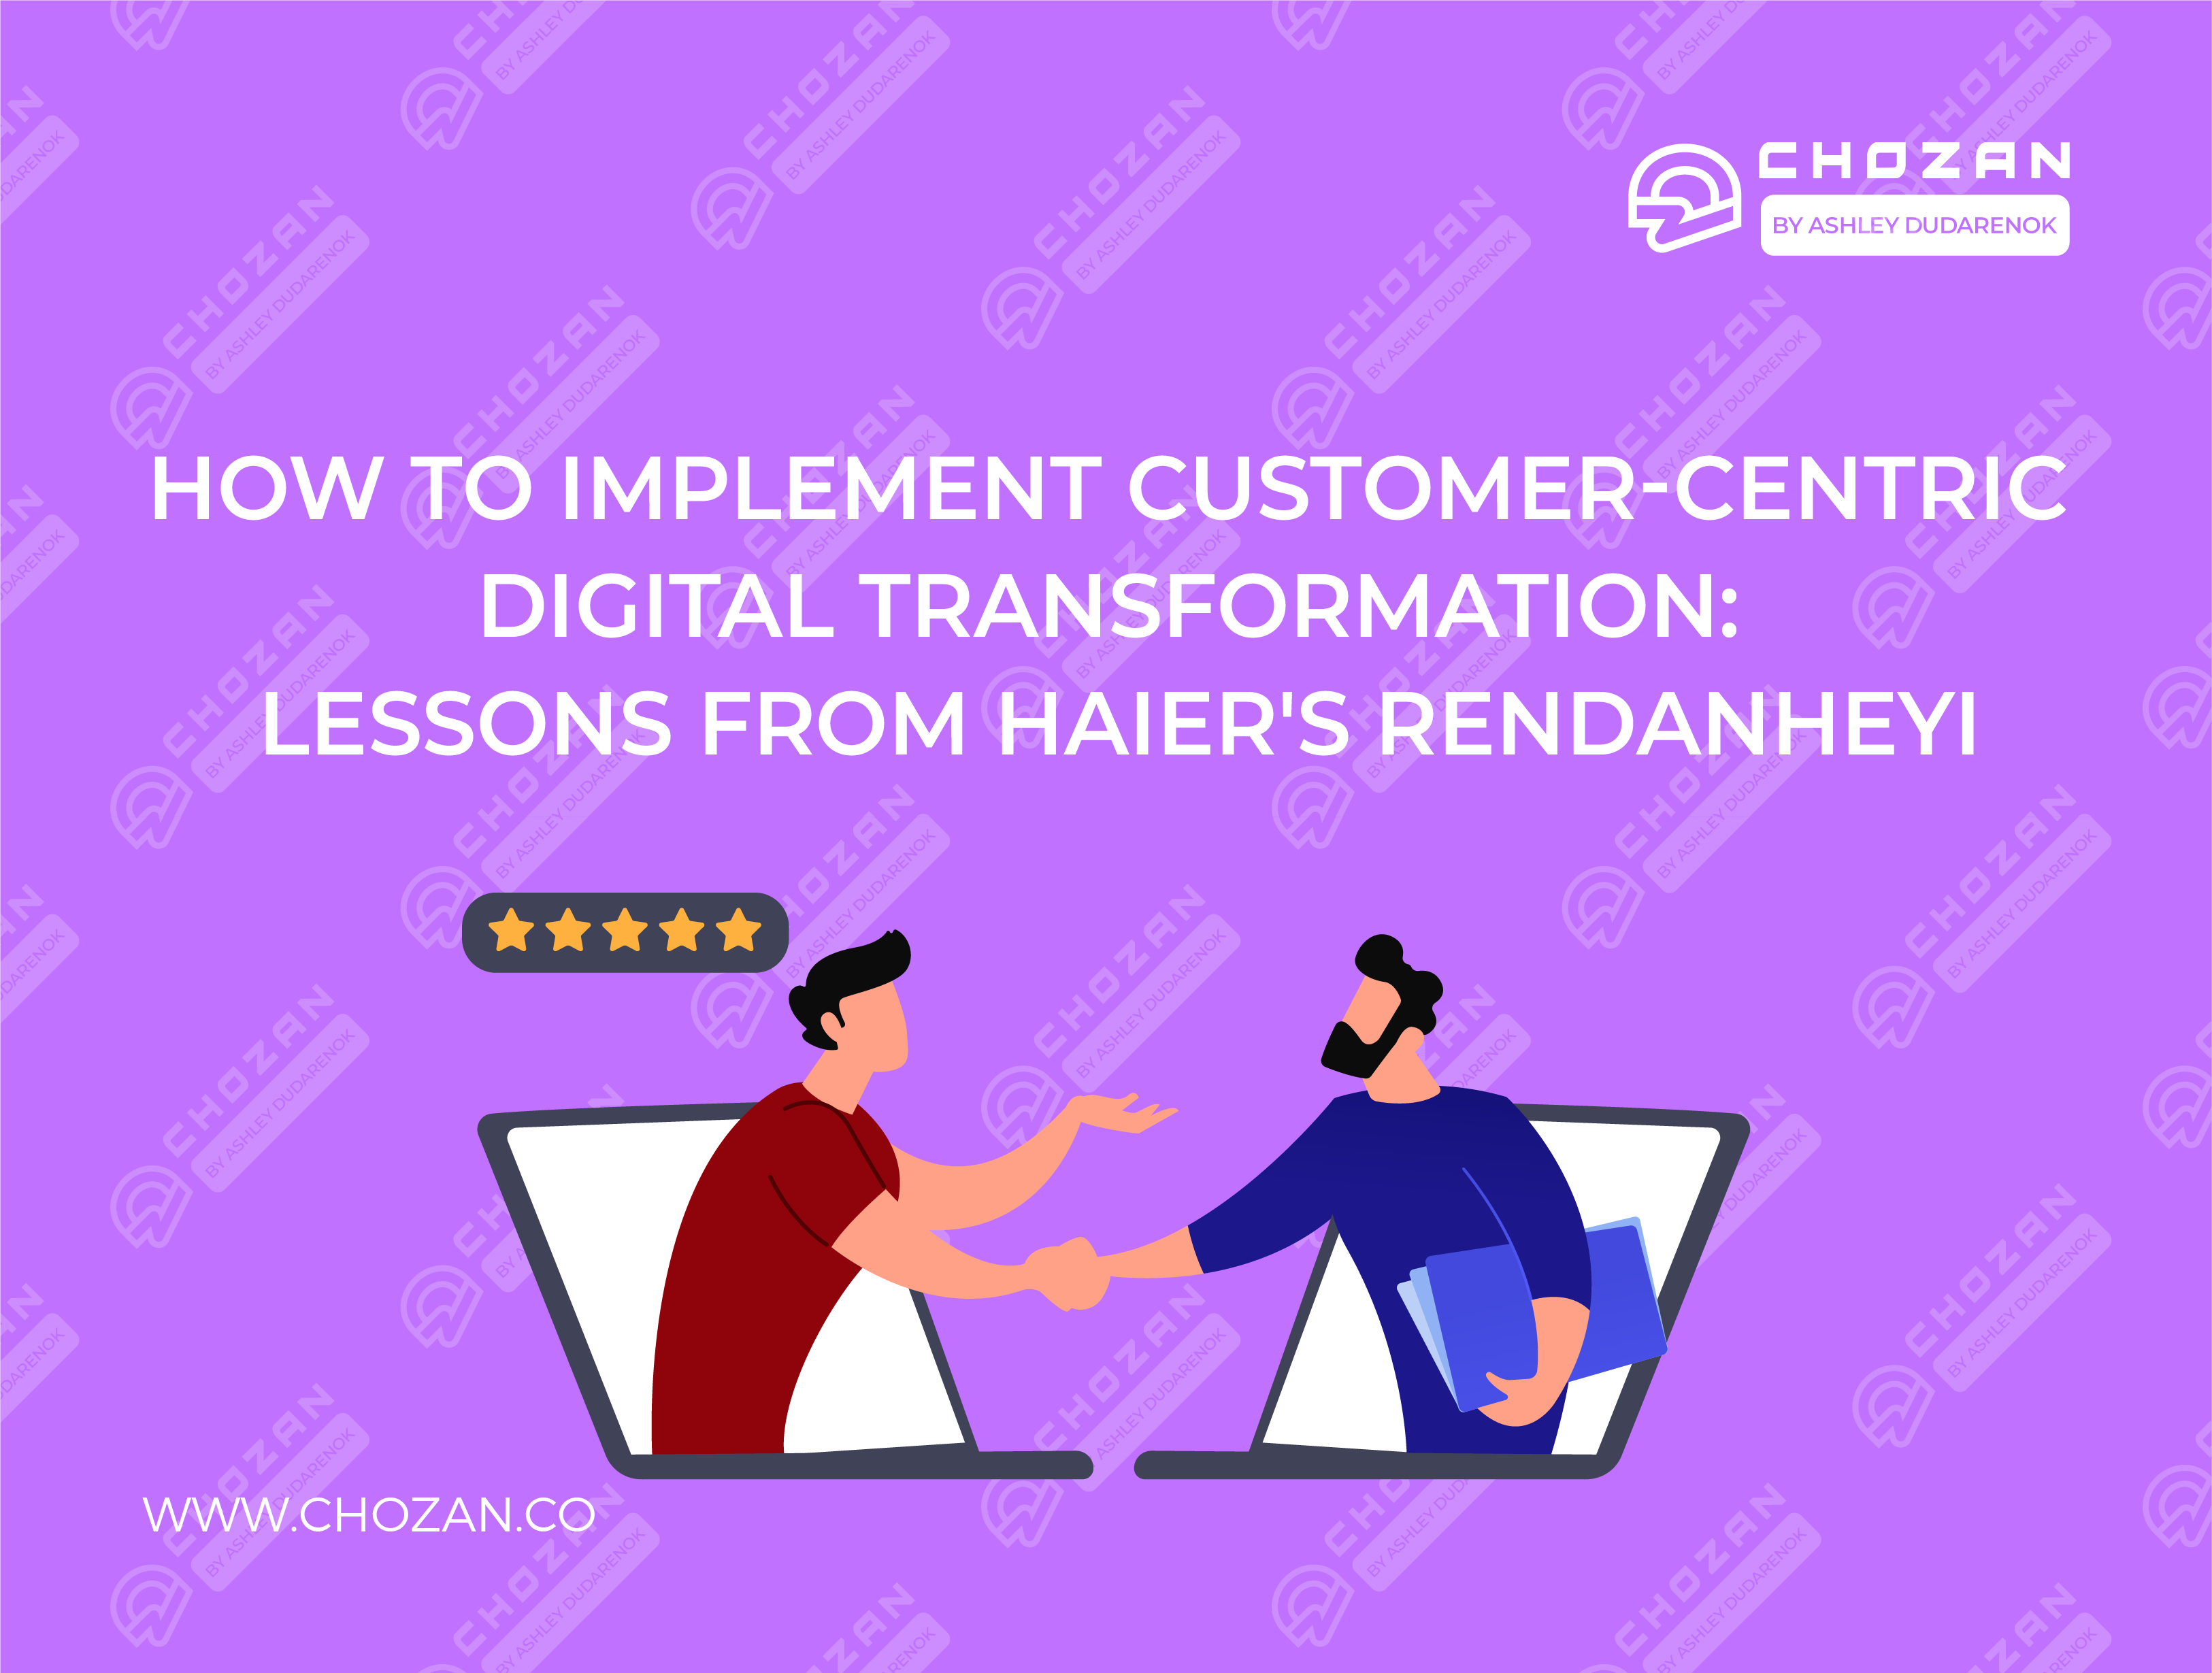 How to Implement Customer-centric Digital Transformation: Lessons From Haier’s RenDanHeYi